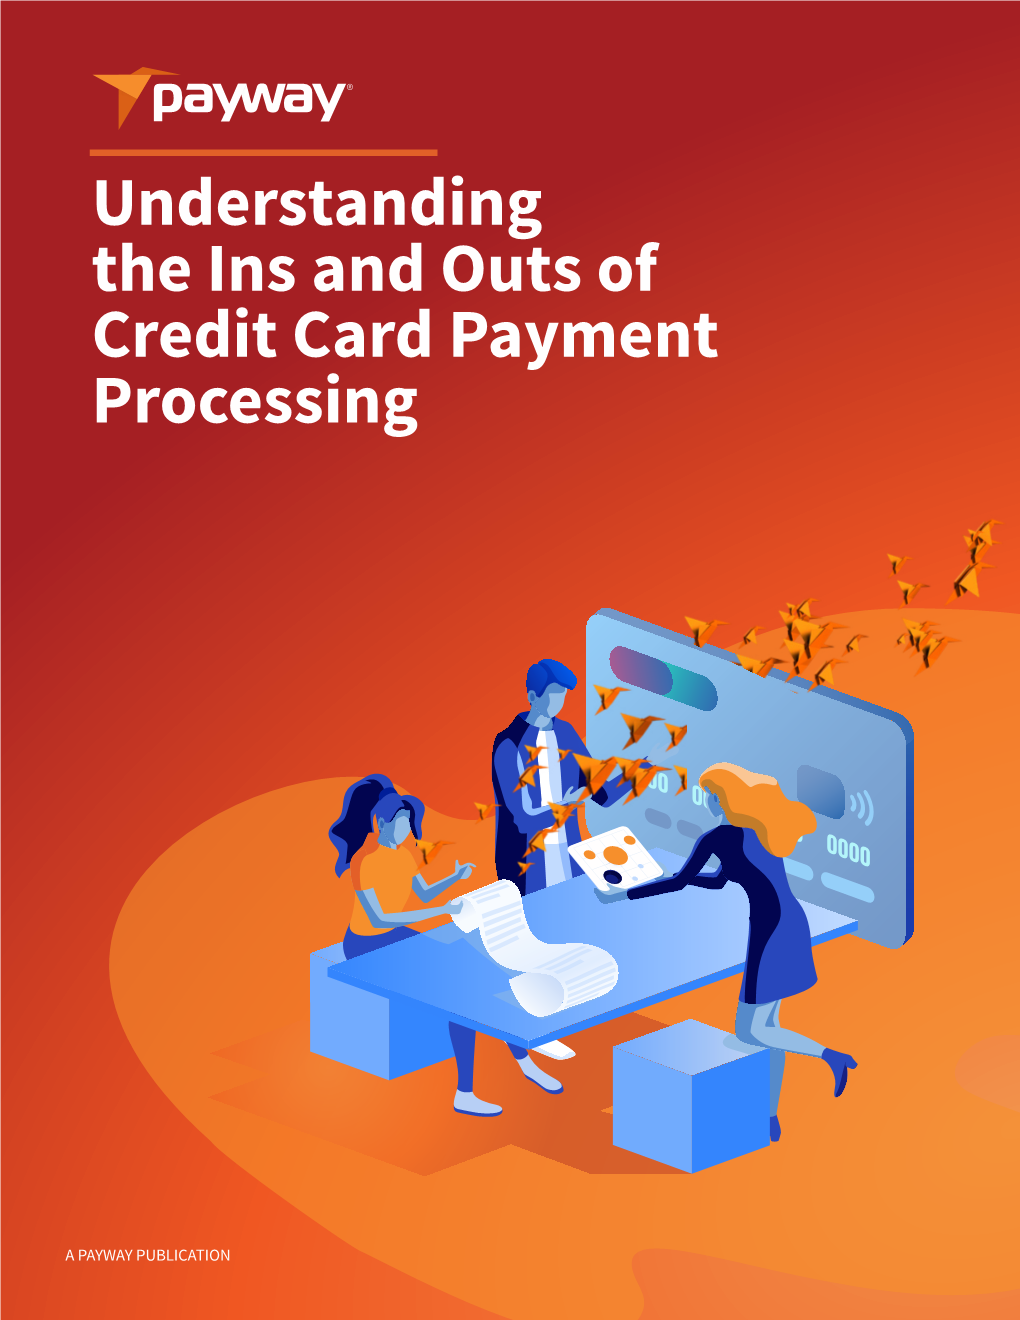 Understanding the Ins and Outs of Credit Card Payment Processing